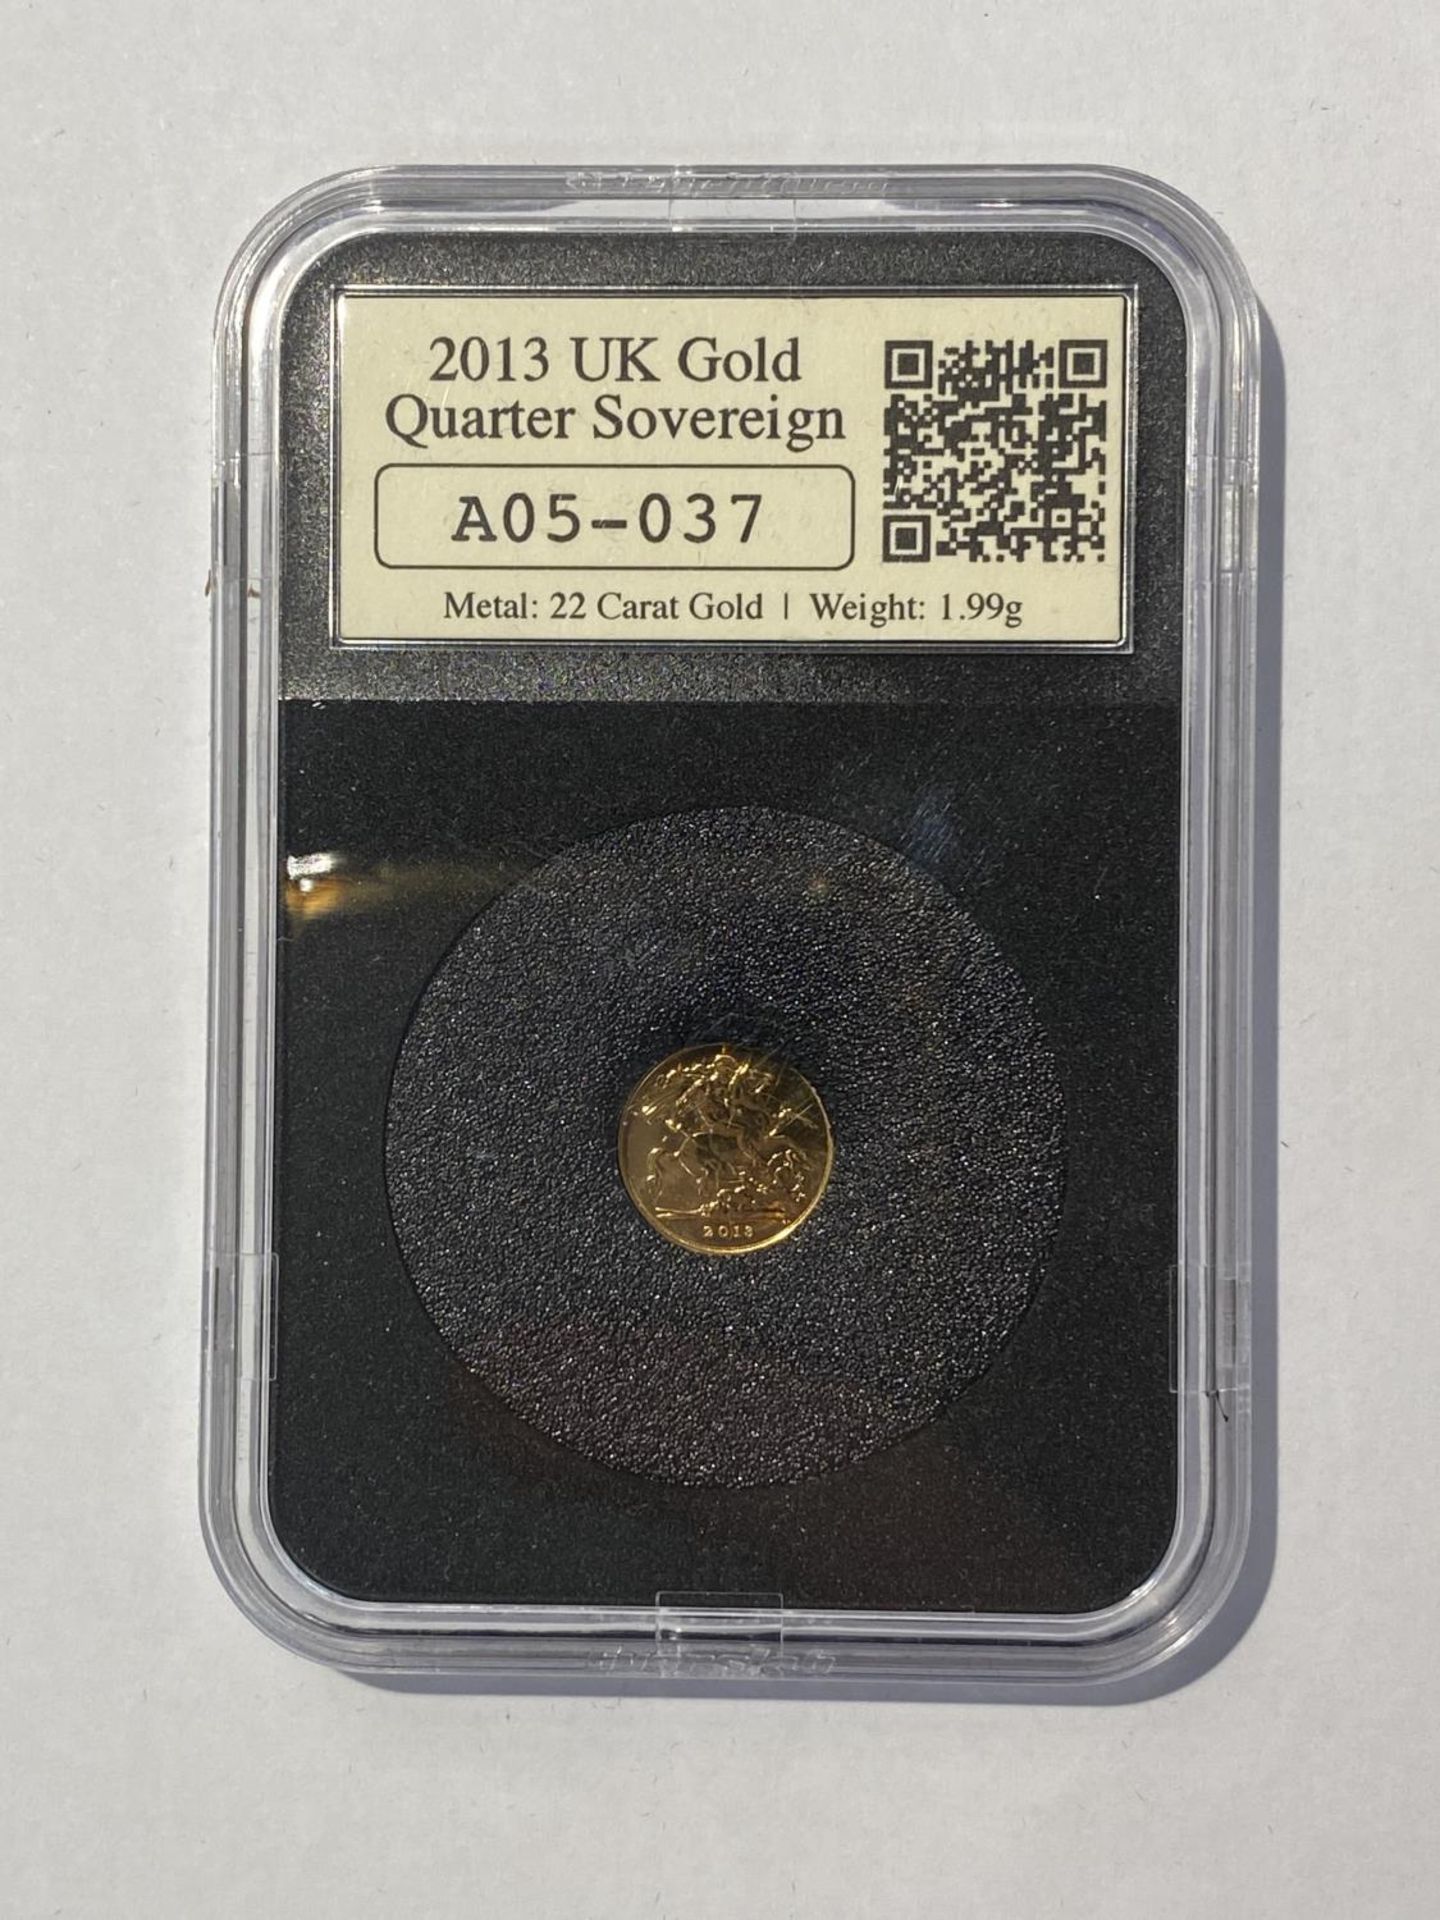 A UK GOLD SOVEREIGN, HALF SOVEREIGN AND QUARTER SOVEREIGN, QUEEN ELIZABETH 11, 2013, NEATLY - Image 4 of 6